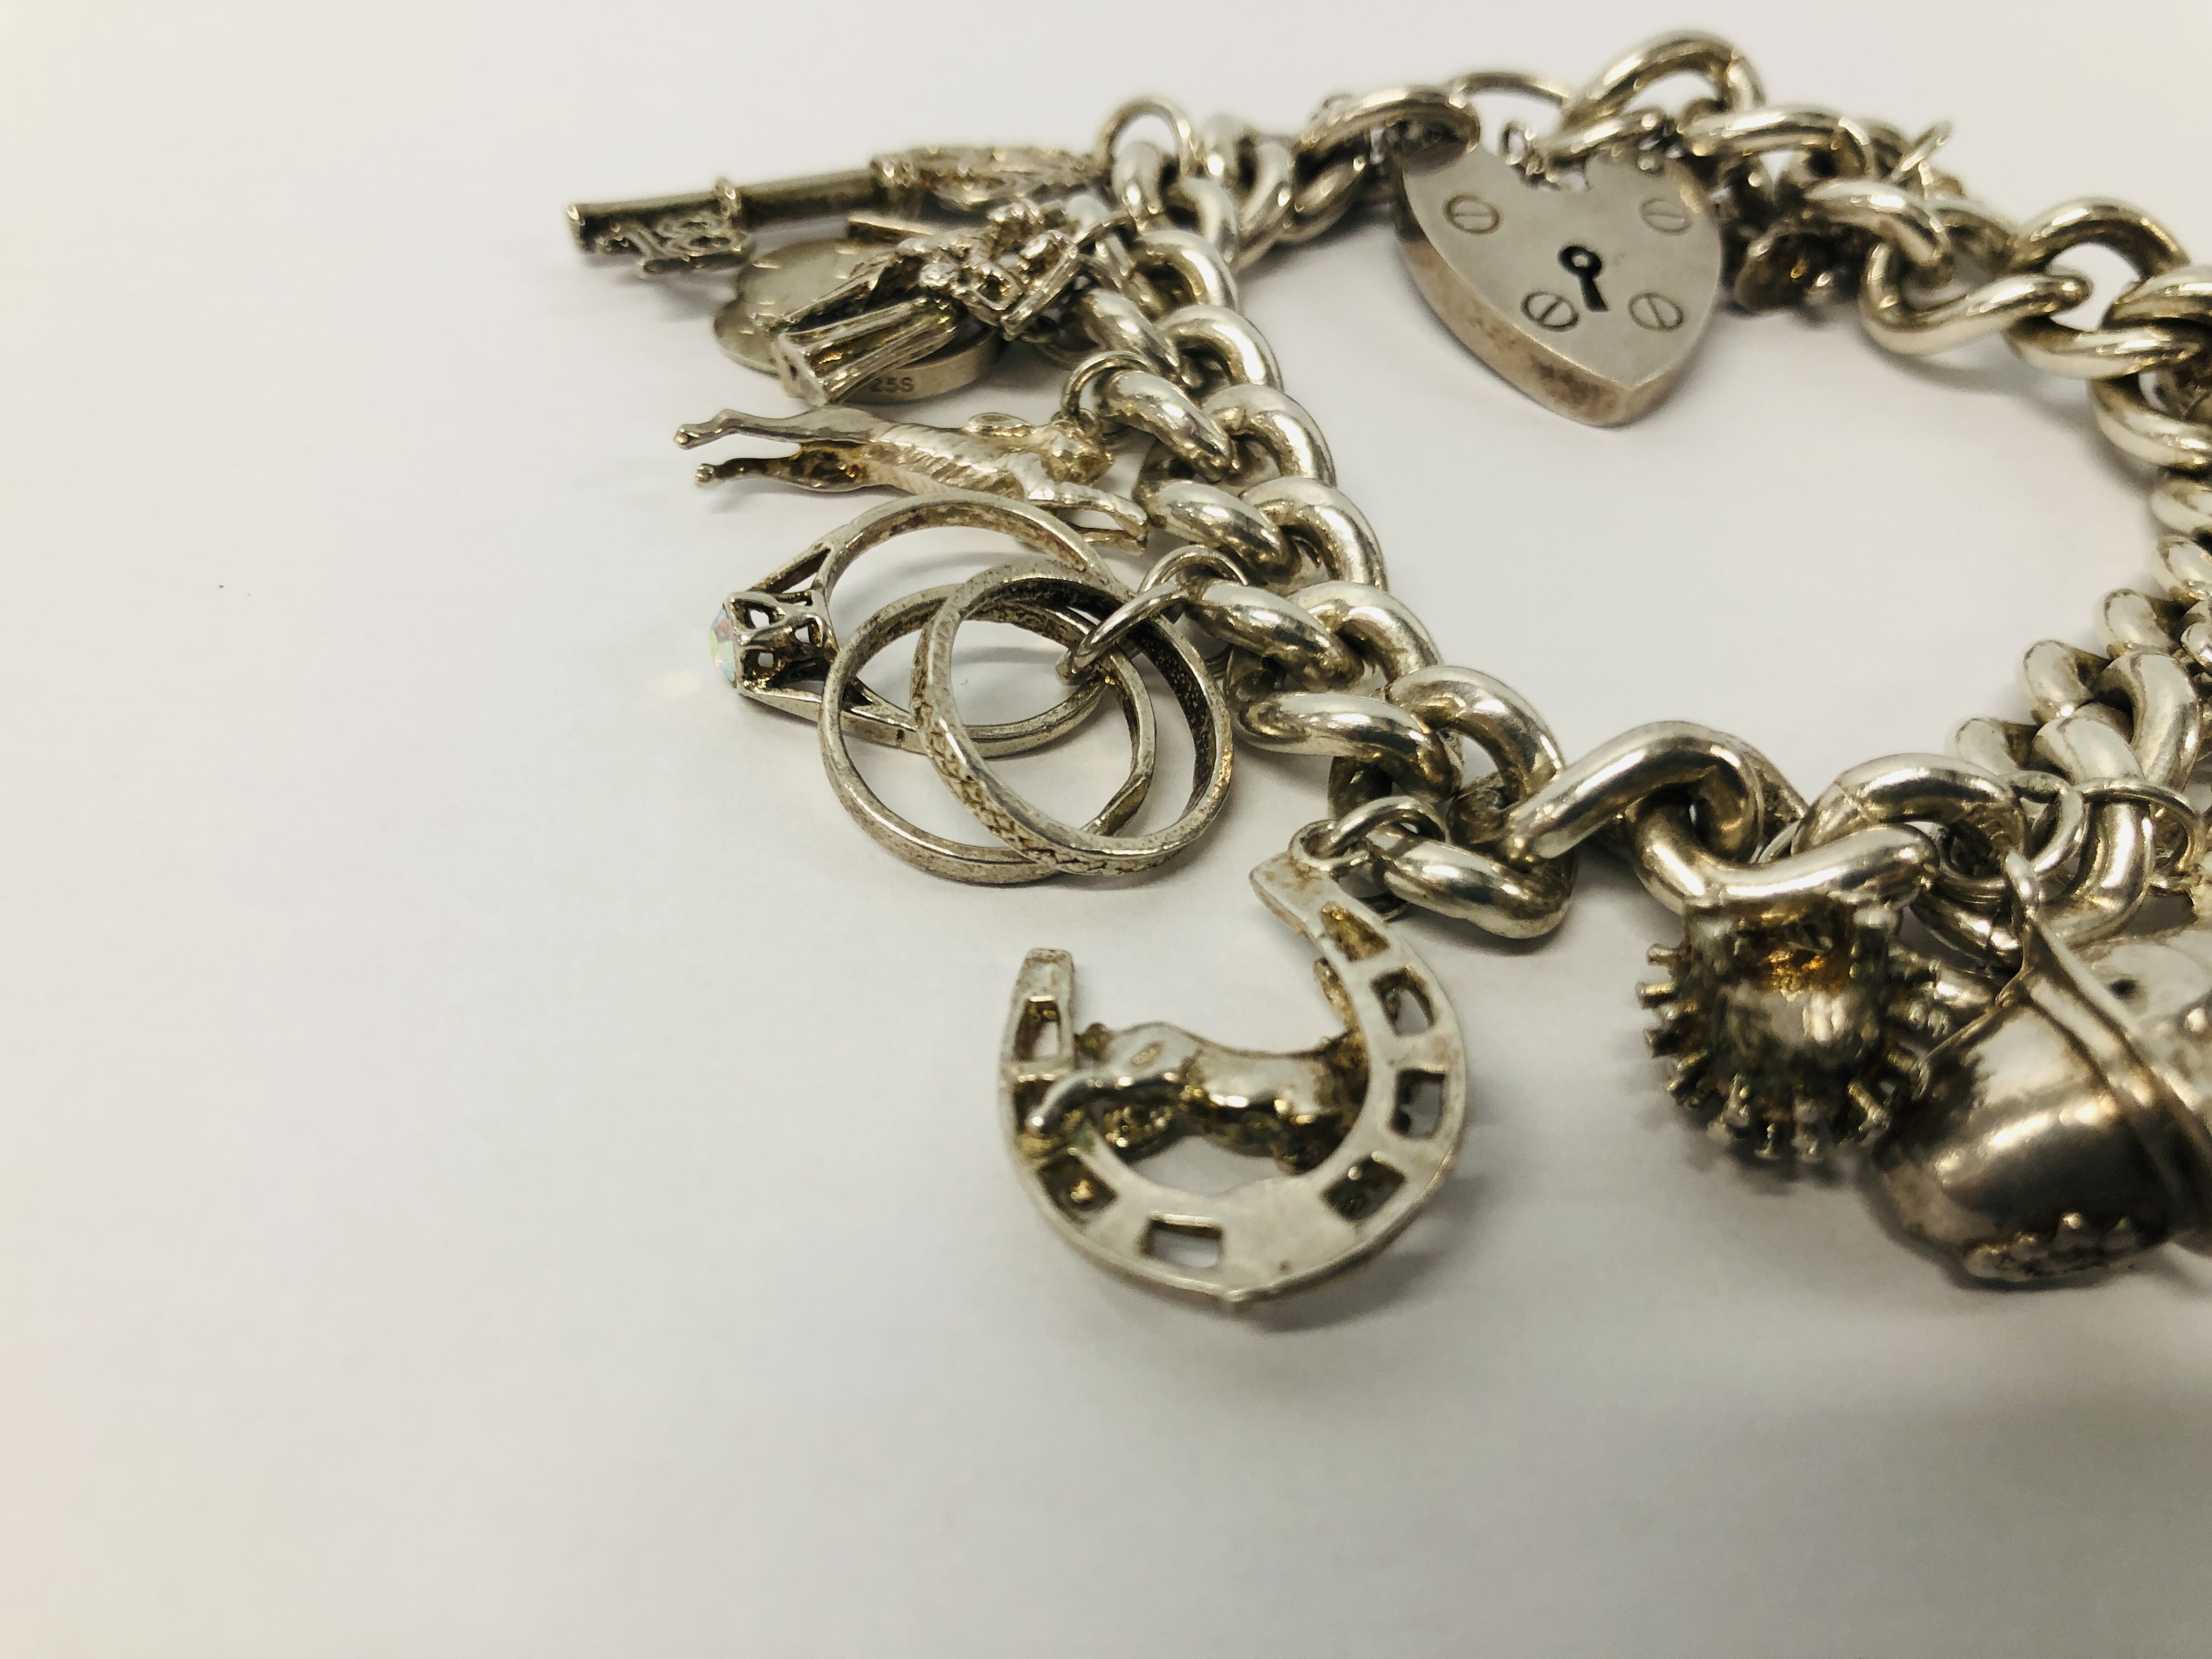 SILVER CHARM BRACELET (15 CHARMS ATTACHED) - Image 3 of 8